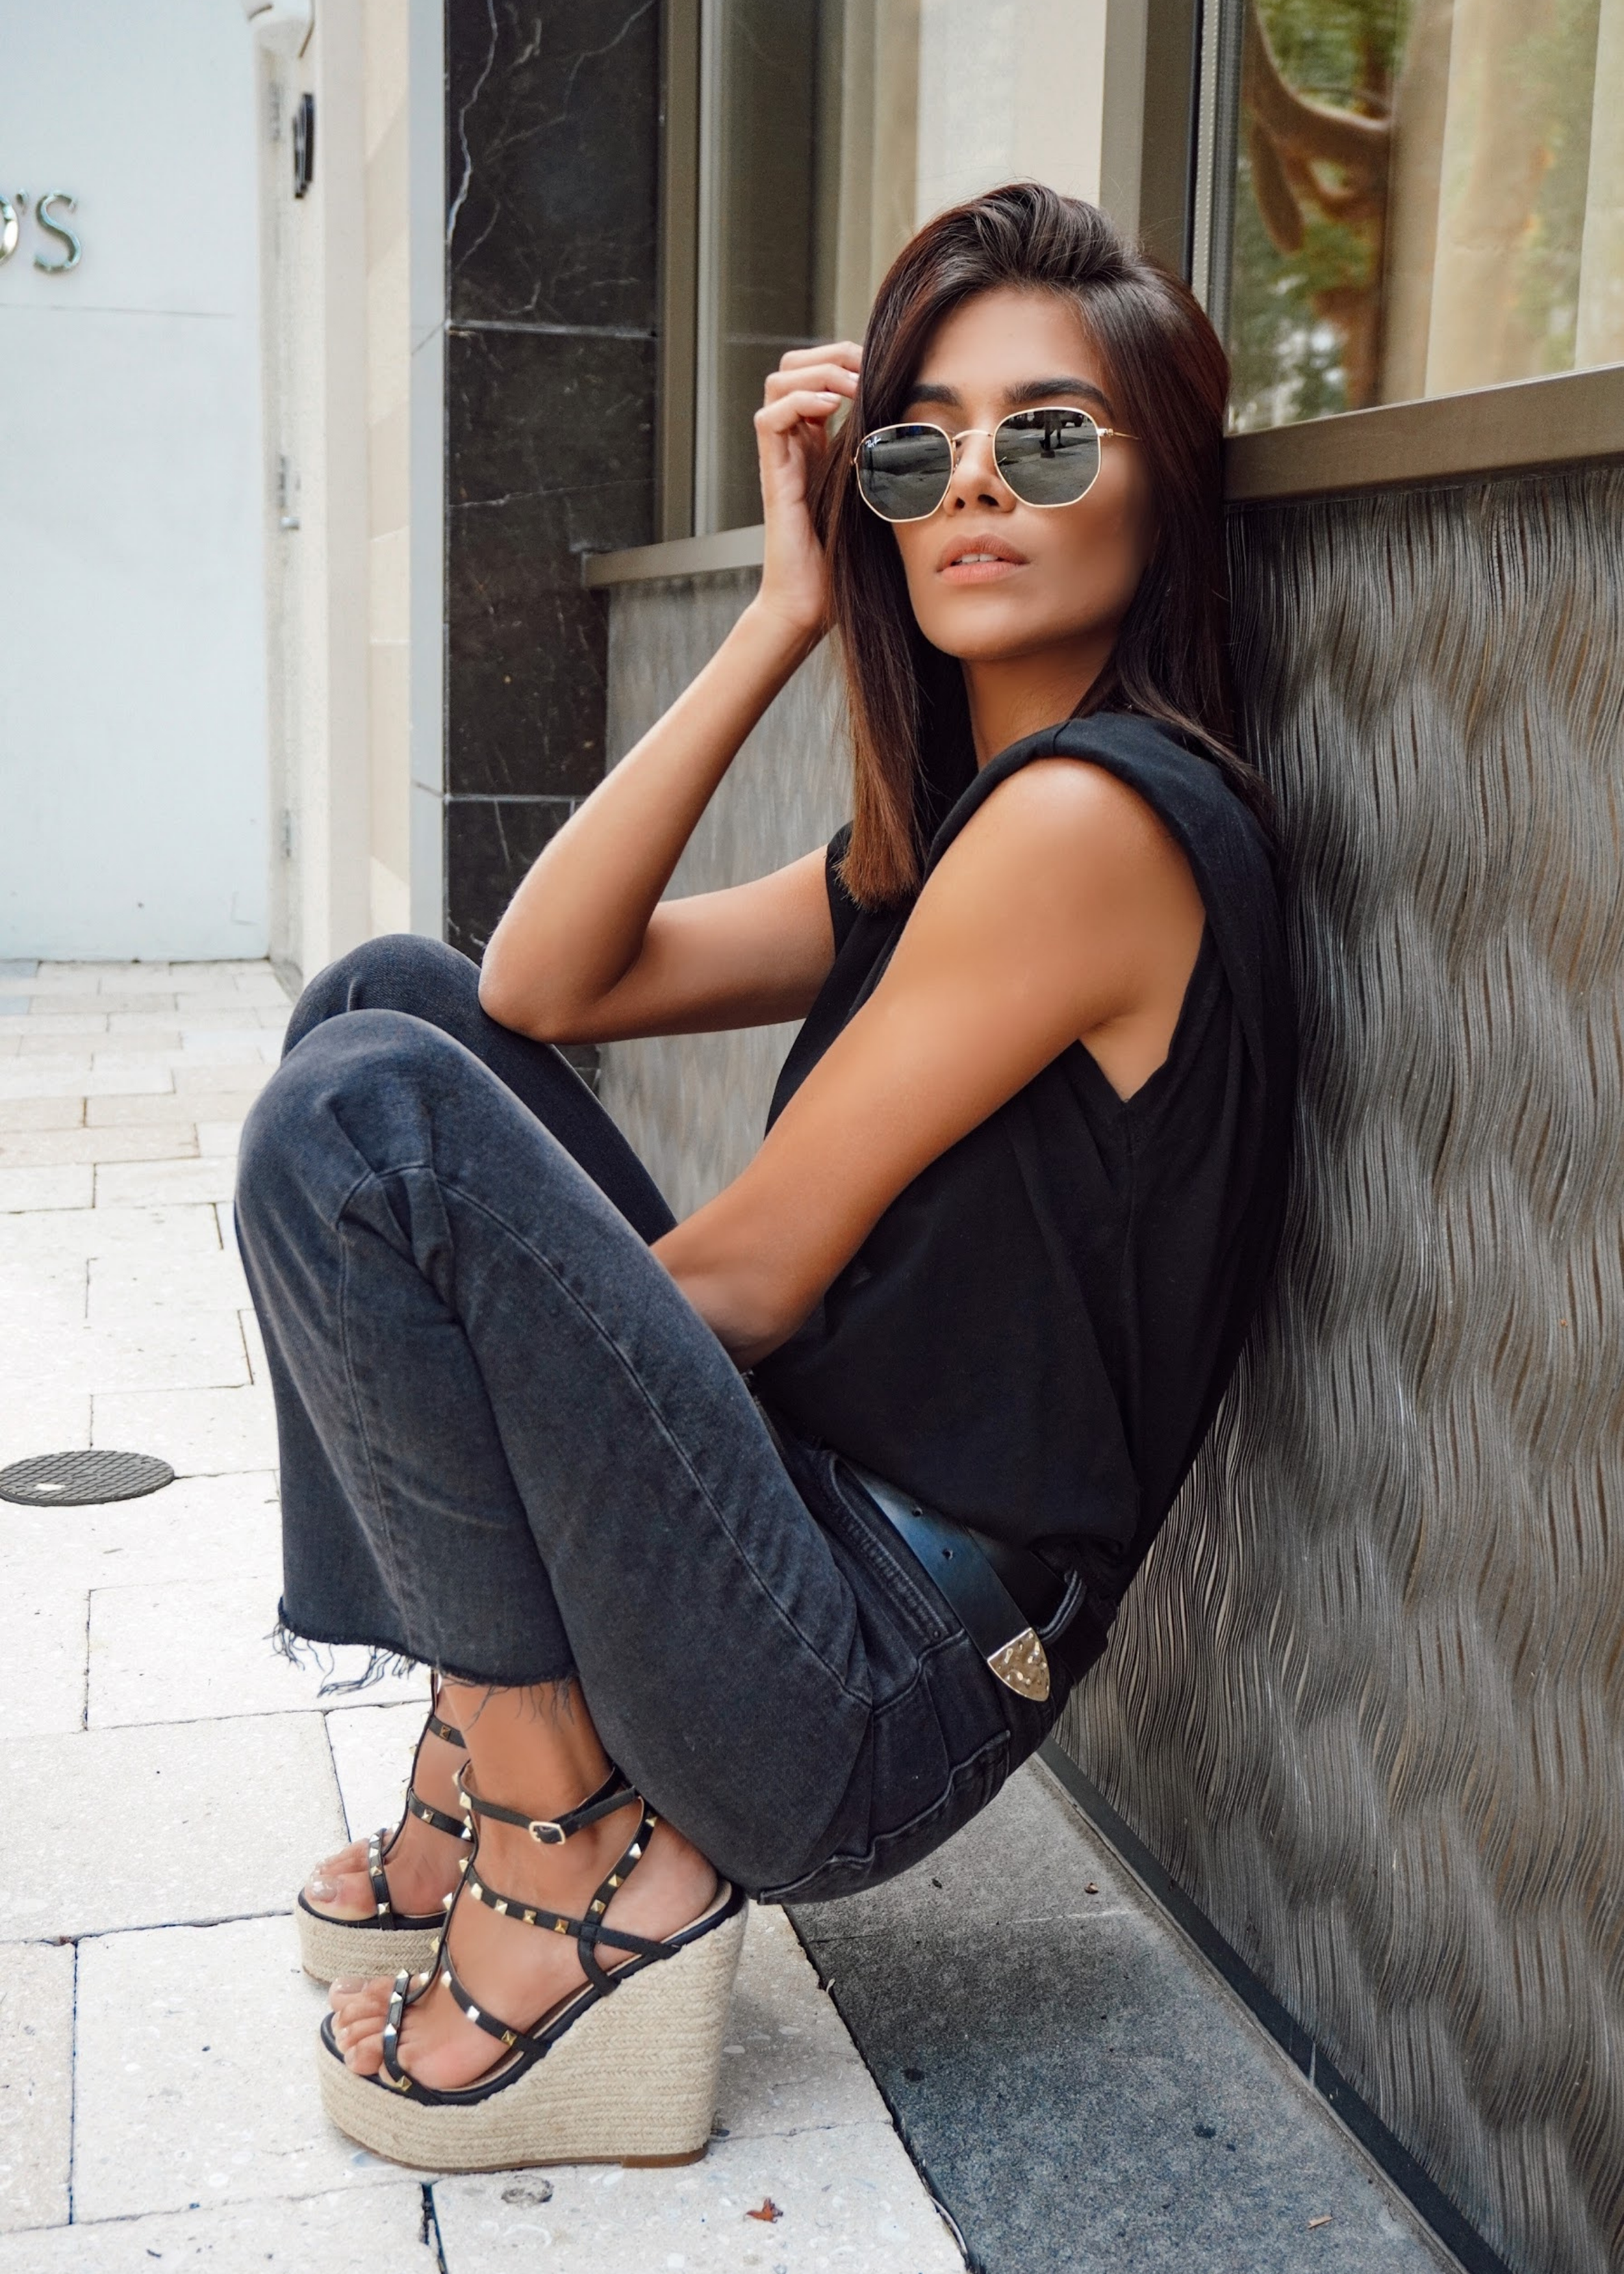 @carlanunez_ dressed up her casual afternoon look with our Astrid studded  platform wedges in black.